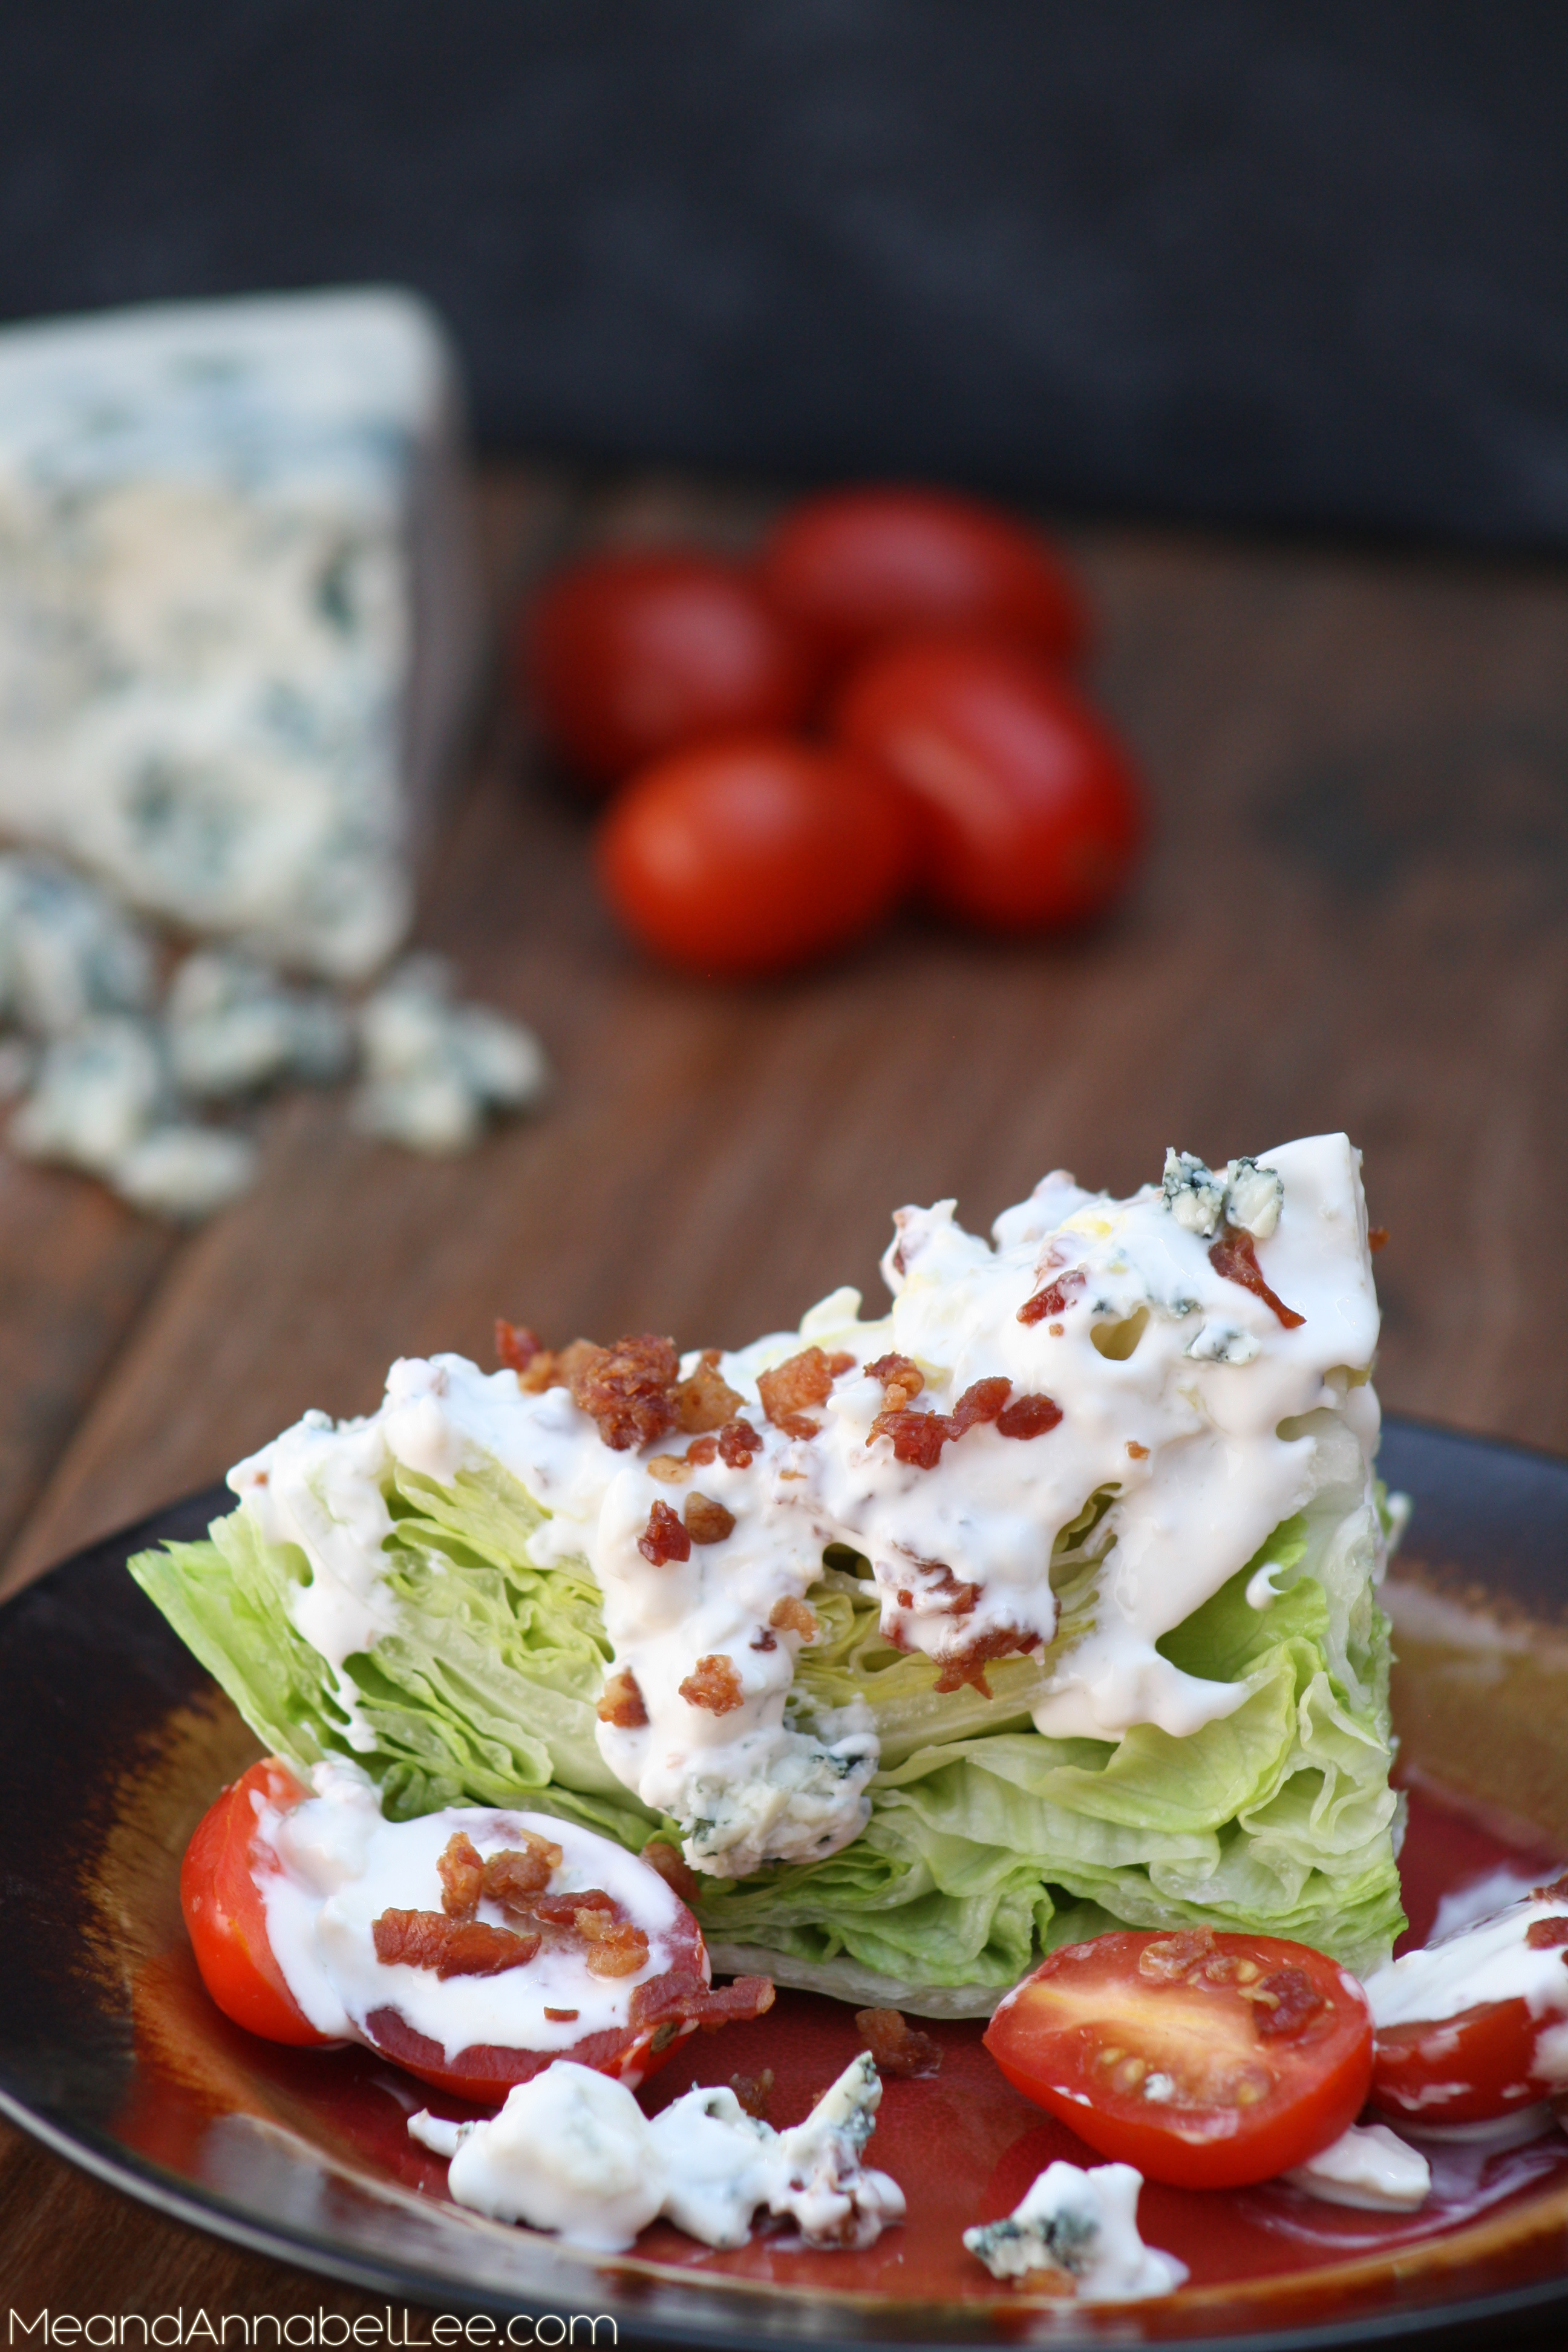 Homemade Chunky Blue Cheese Dressing, Wedge Salad, Salad Dressing ... www.MeandAnnabelLee.com